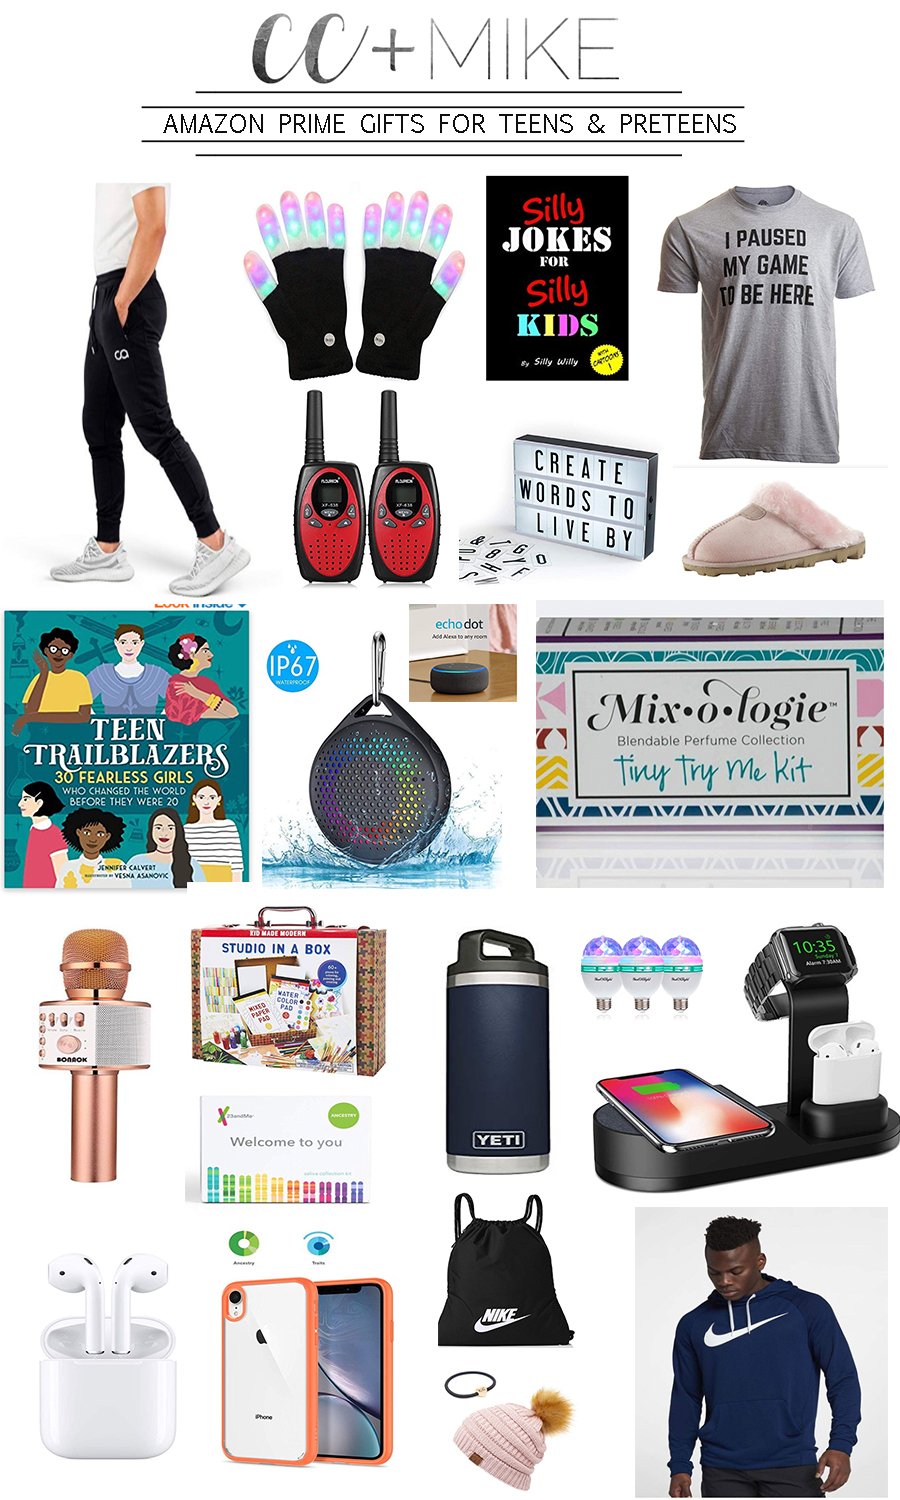 Gift Guide // Last Minute Gifts from Amazon | Trending christmas gifts, Christmas  gifts for girls, Teenage girl gifts christmas